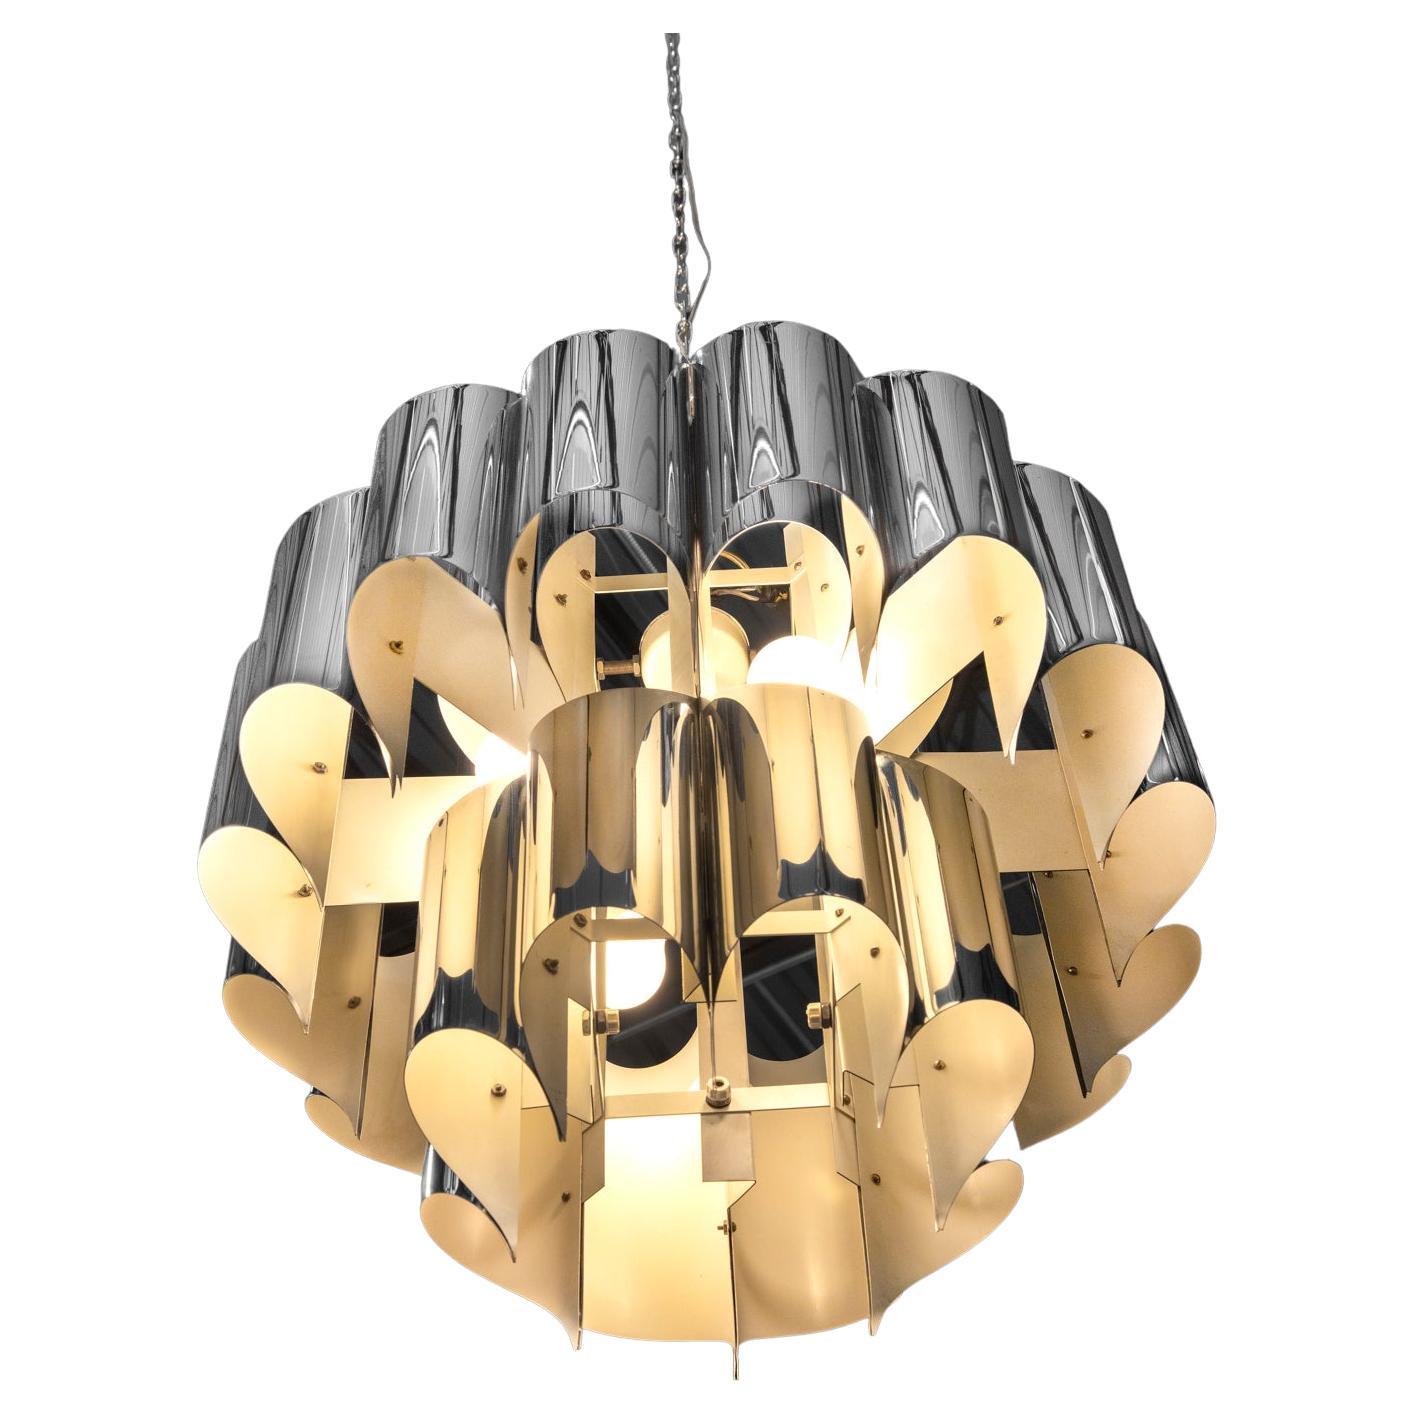 SALE ONE WEEK ONLY

Large original 1970s version chandelier, Polished Metal, Tubular, Great Condition, Mid-Century Modern.
An unusually handsome and elegant Sonneman chandelier design that commands attention and enhances any space in which it is